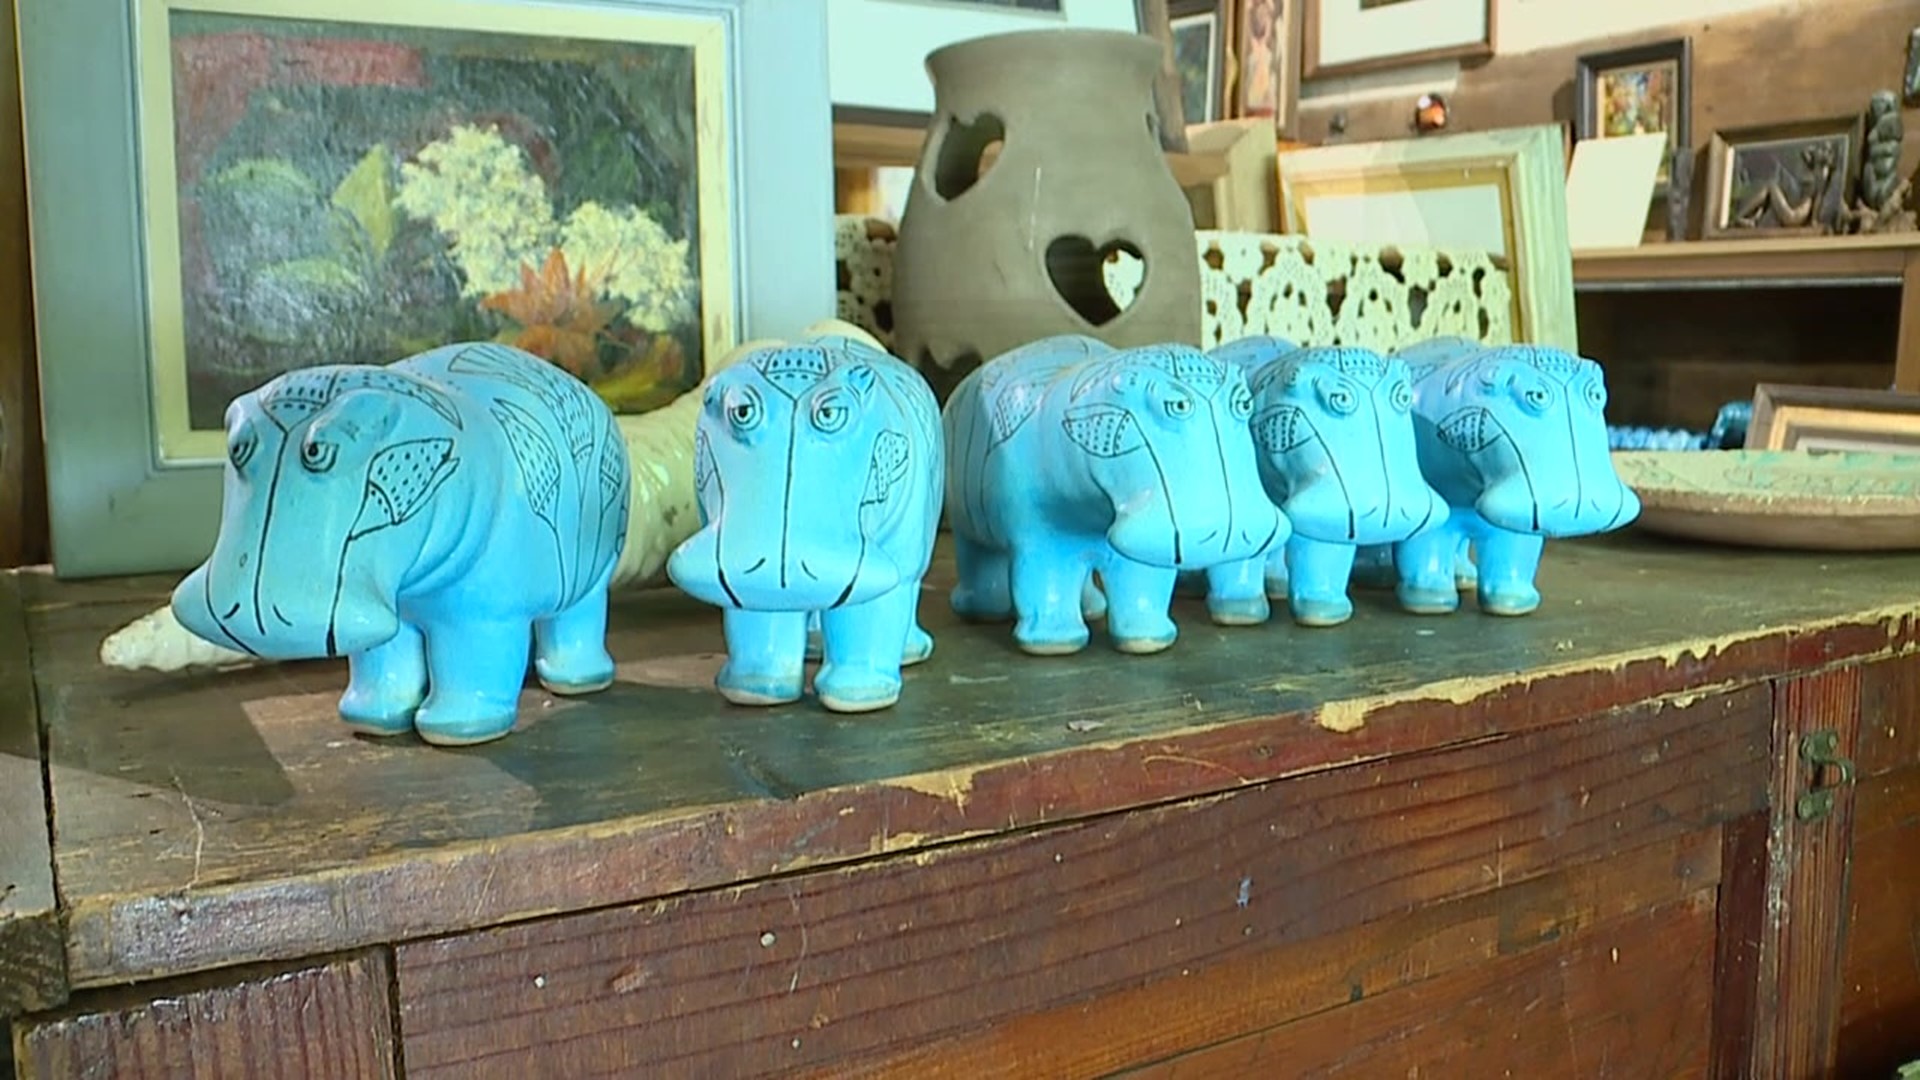 Newswatch 16's Chris Keating spoke with those at M Hart Pottery about what the decades-long business has meant to them as well as the community.